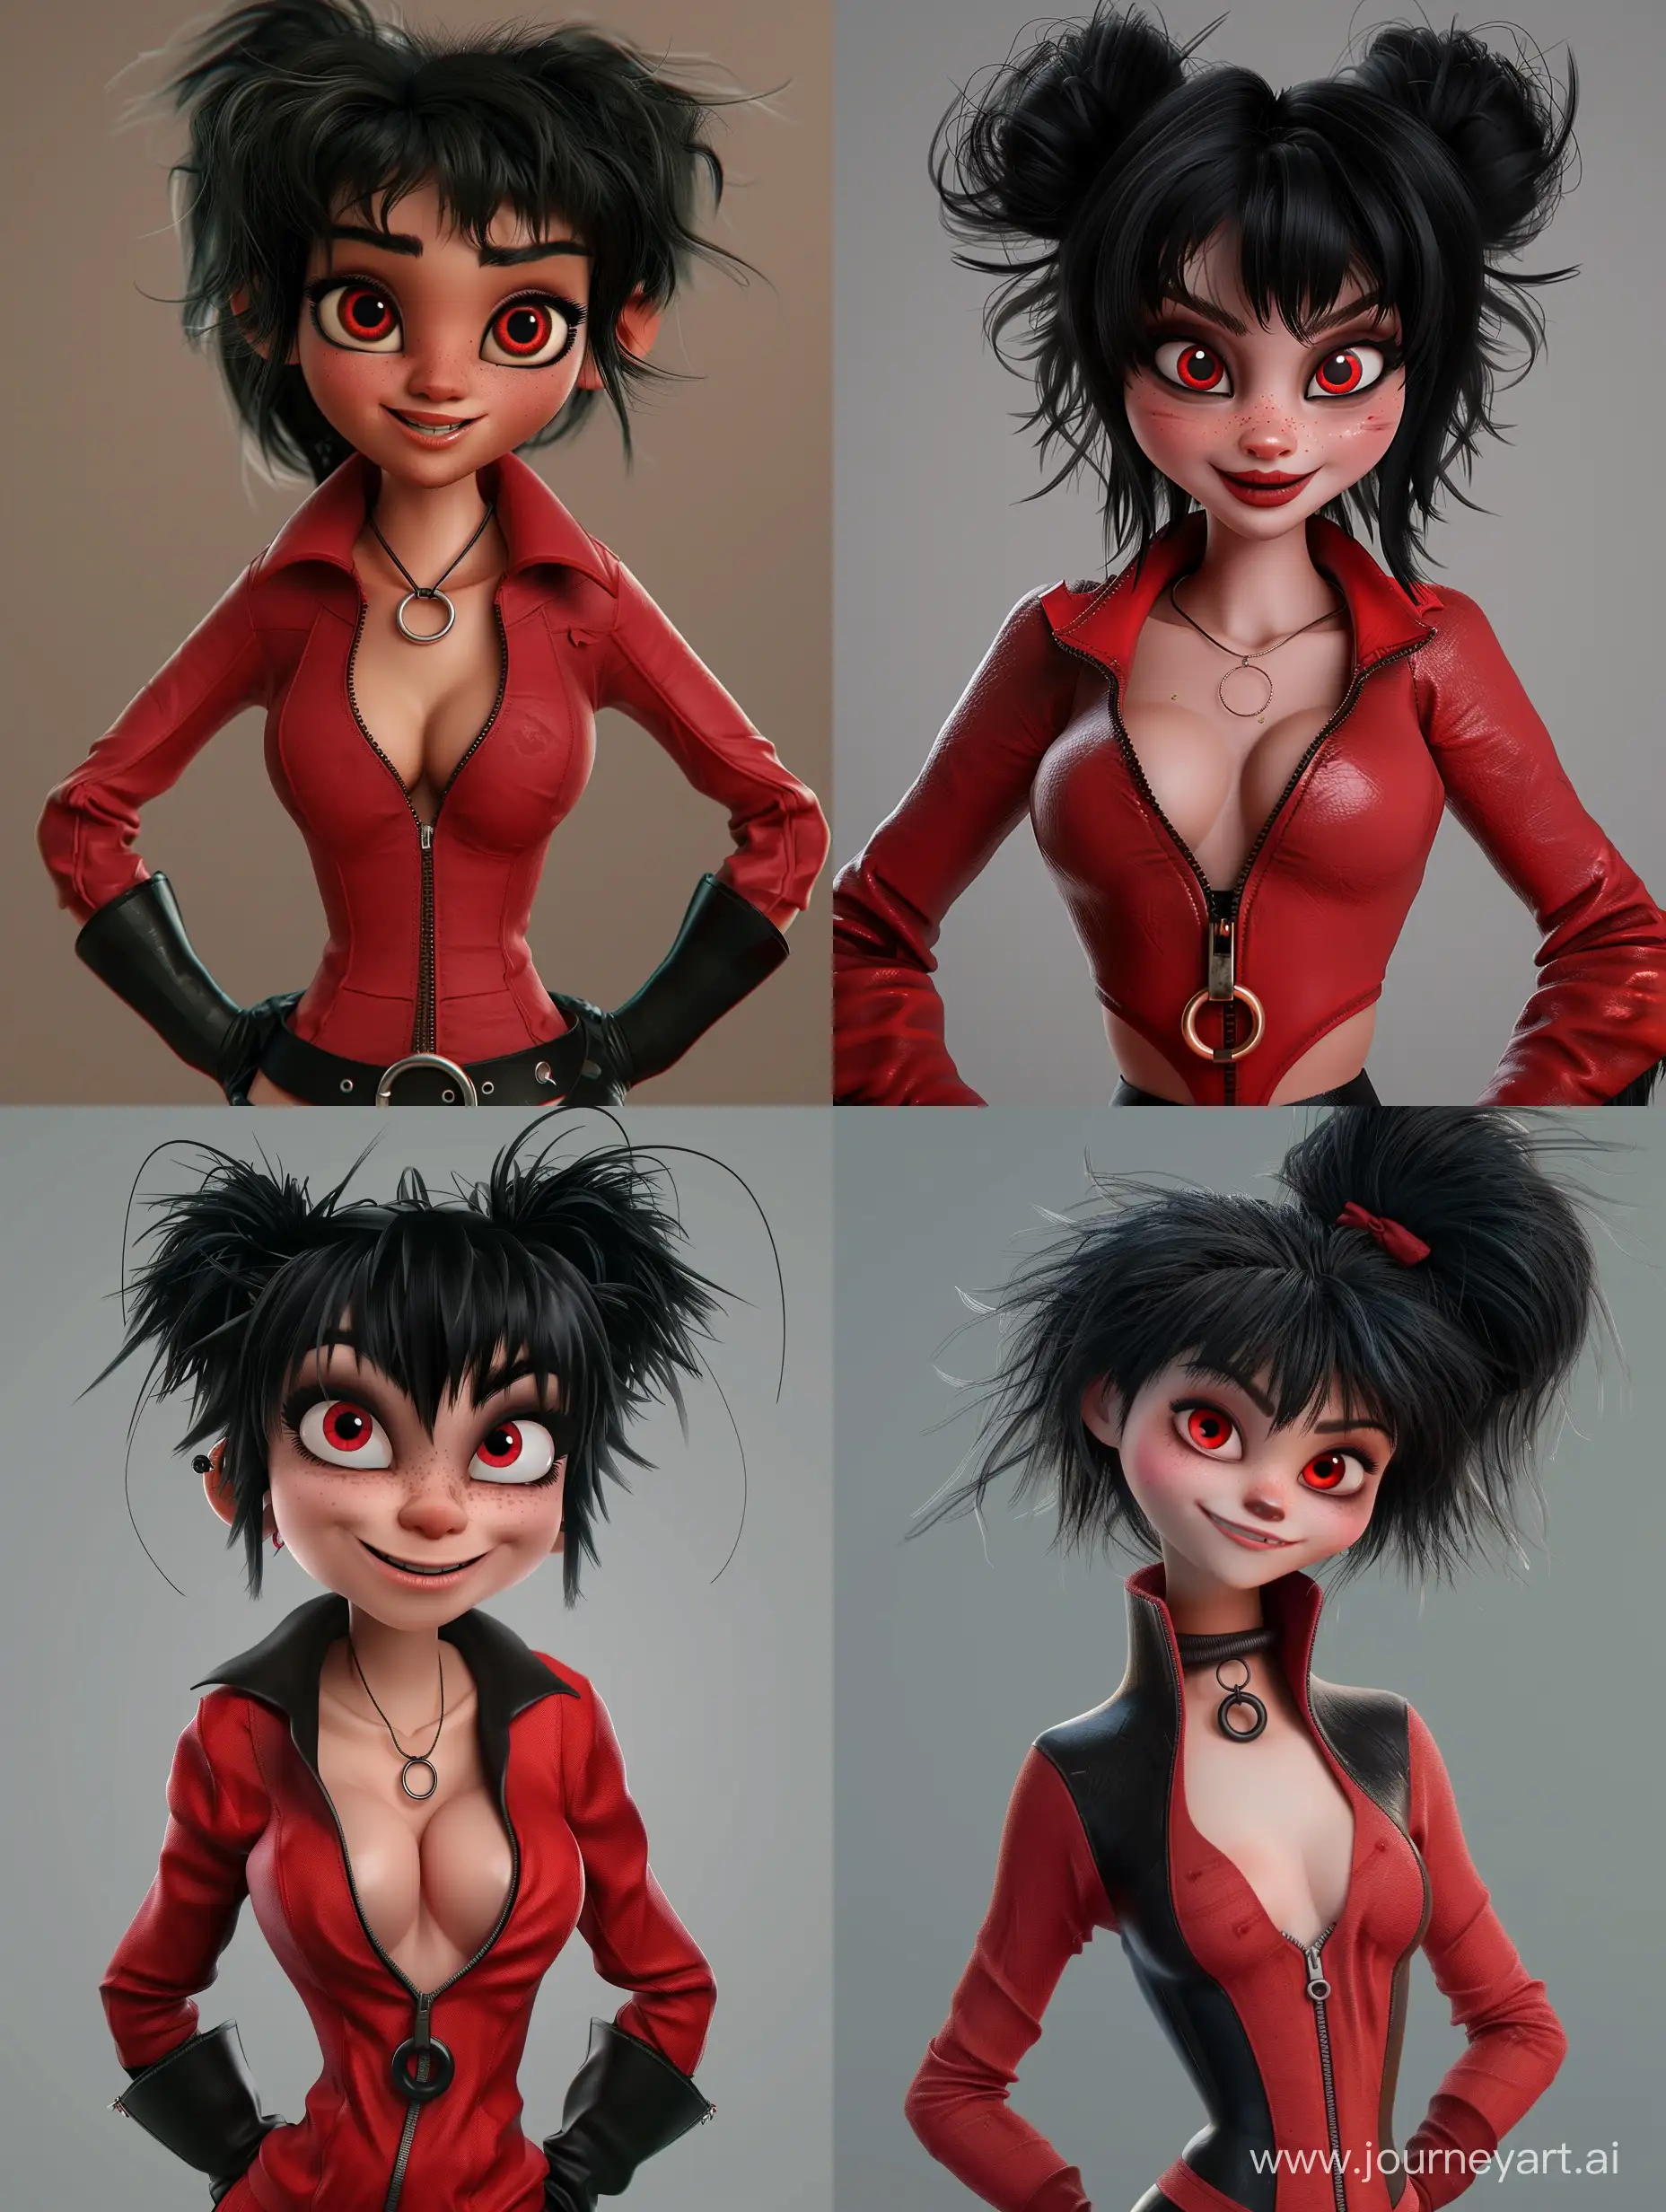 Badass-Cartoon-Girl-with-Red-Eyes-and-Leather-Outfit-Smiling-in-Cool-Pose